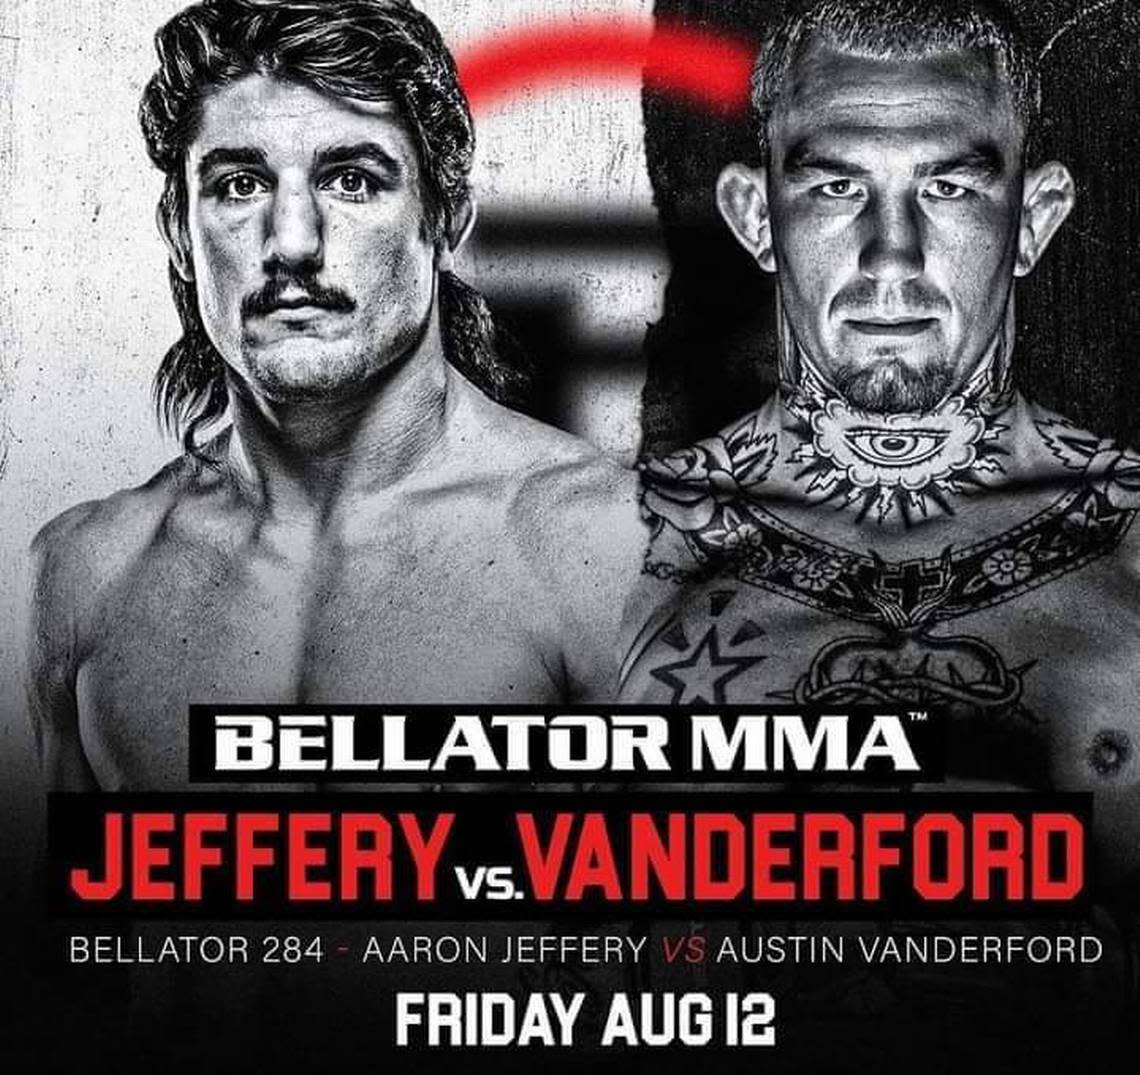 Austin “The Gentleman” Vanderford of (South Florida) American Top Team battles Aaron Jeffery on the main card of Bellator MMA 284 on Friday, Aug. 12 on Showtime.